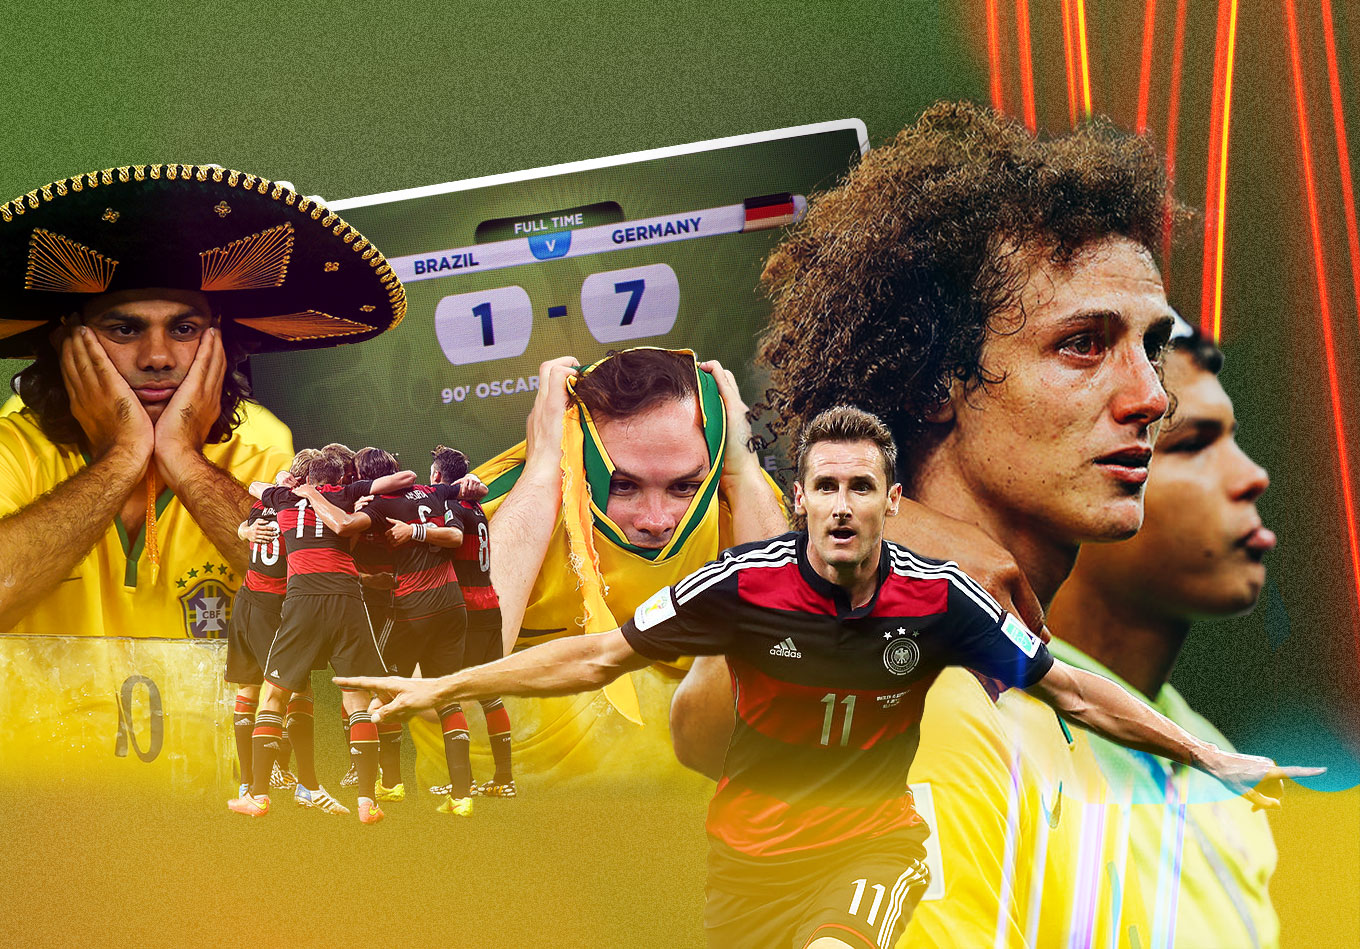 About That Game: Brazil 1-7 Germany (2014) | The Analyst